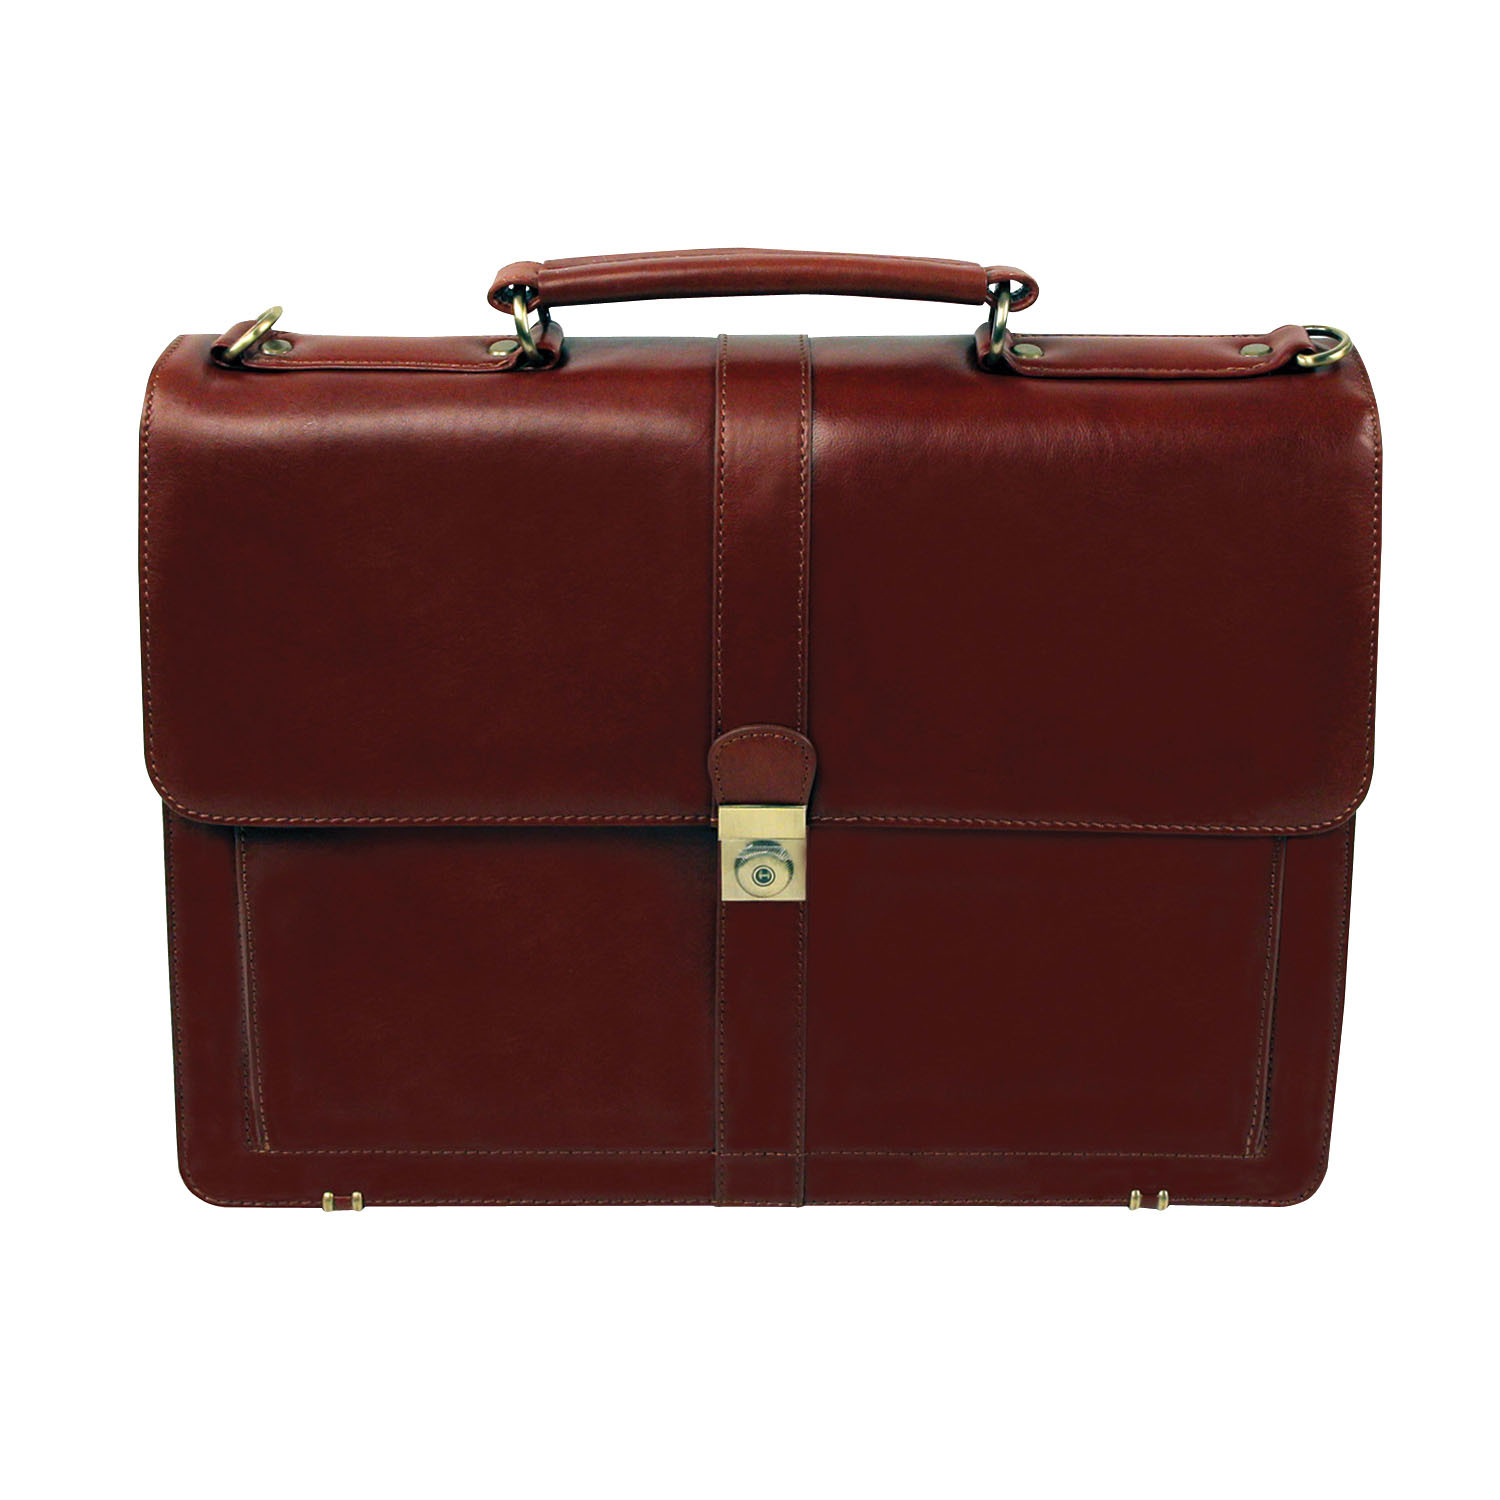 Executive Leather Briefcase // Cognac - Bugatti - Touch of Modern